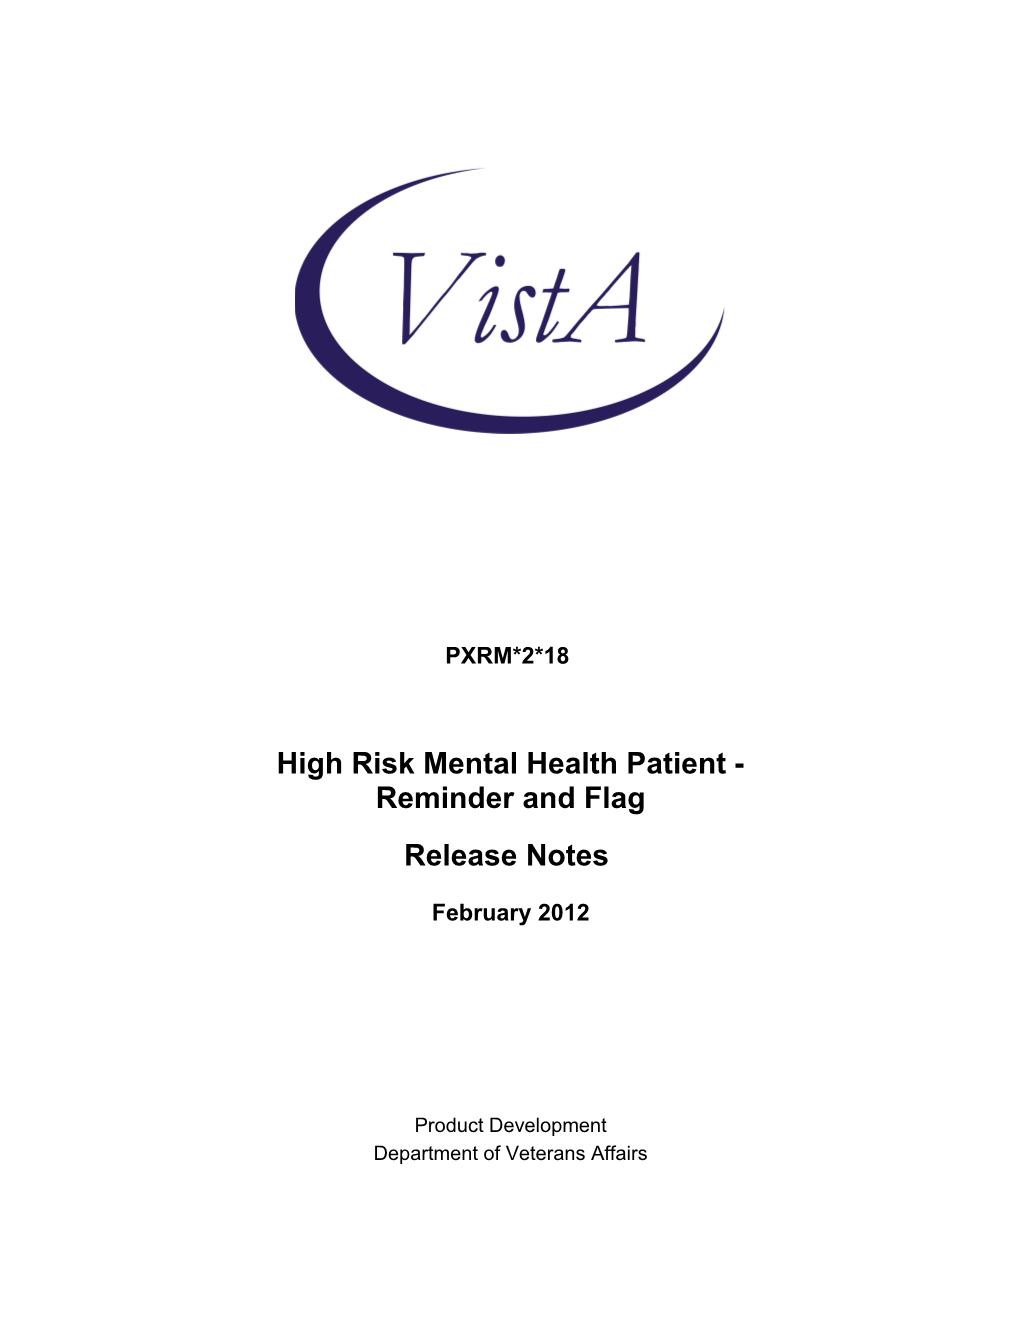 You Could Add Detailed Steps for Setting up the VA-HEP C RISK ASSESSMENT and VA-NATIONAL s1